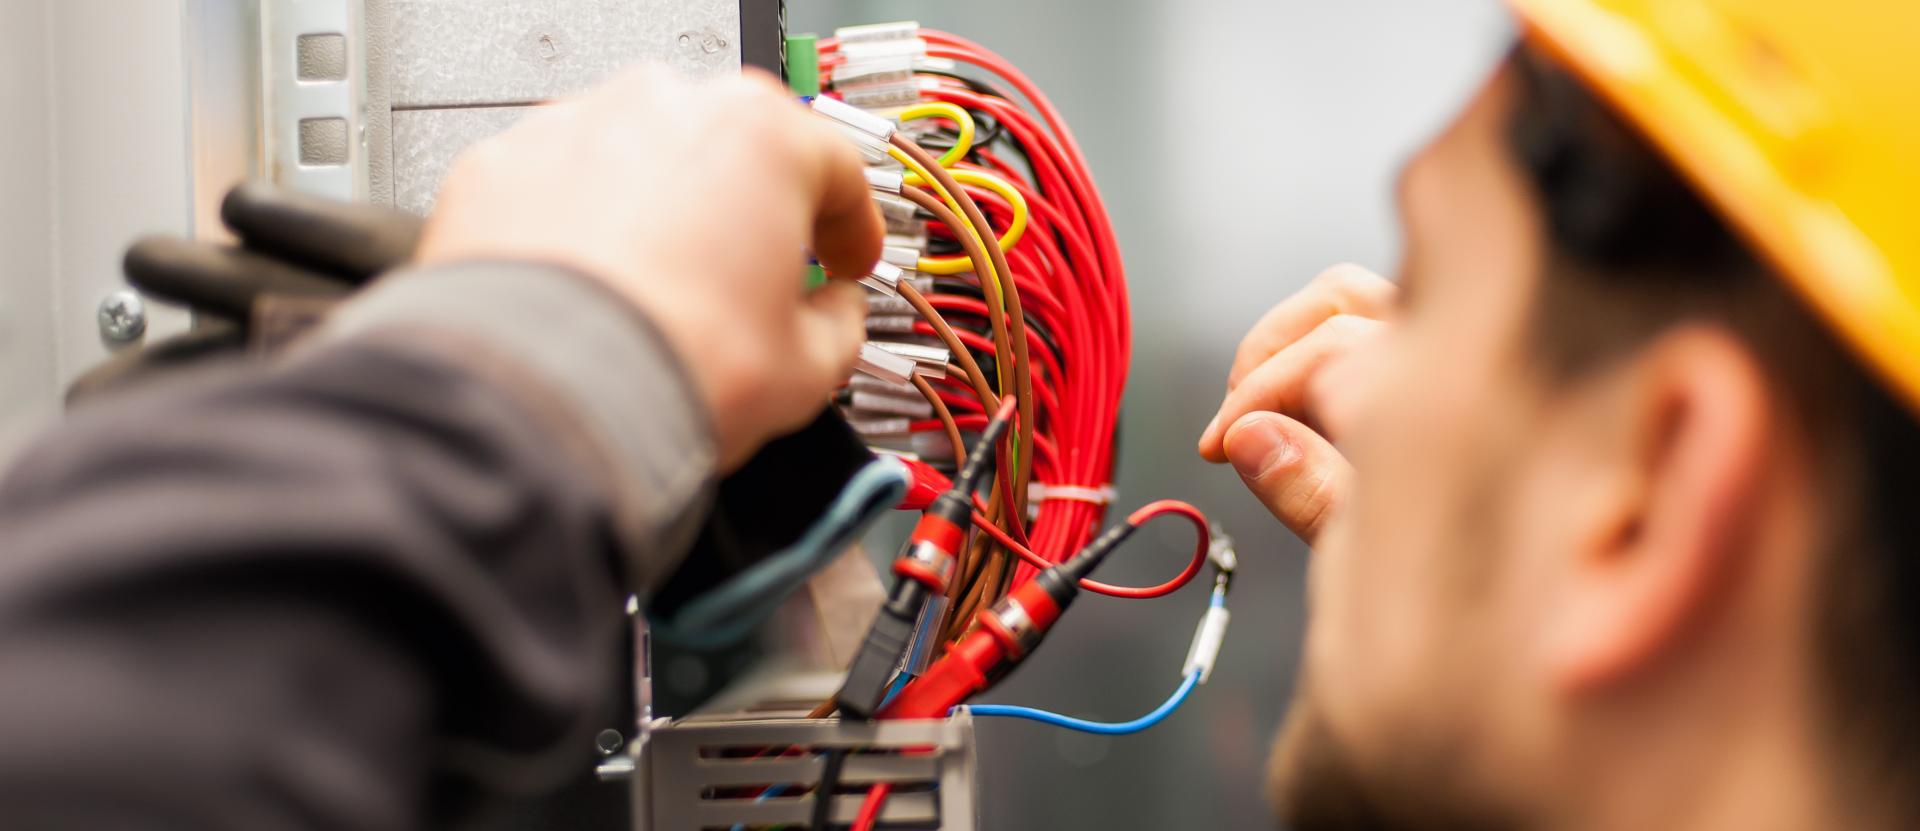 The Importance of an Electrical Panel